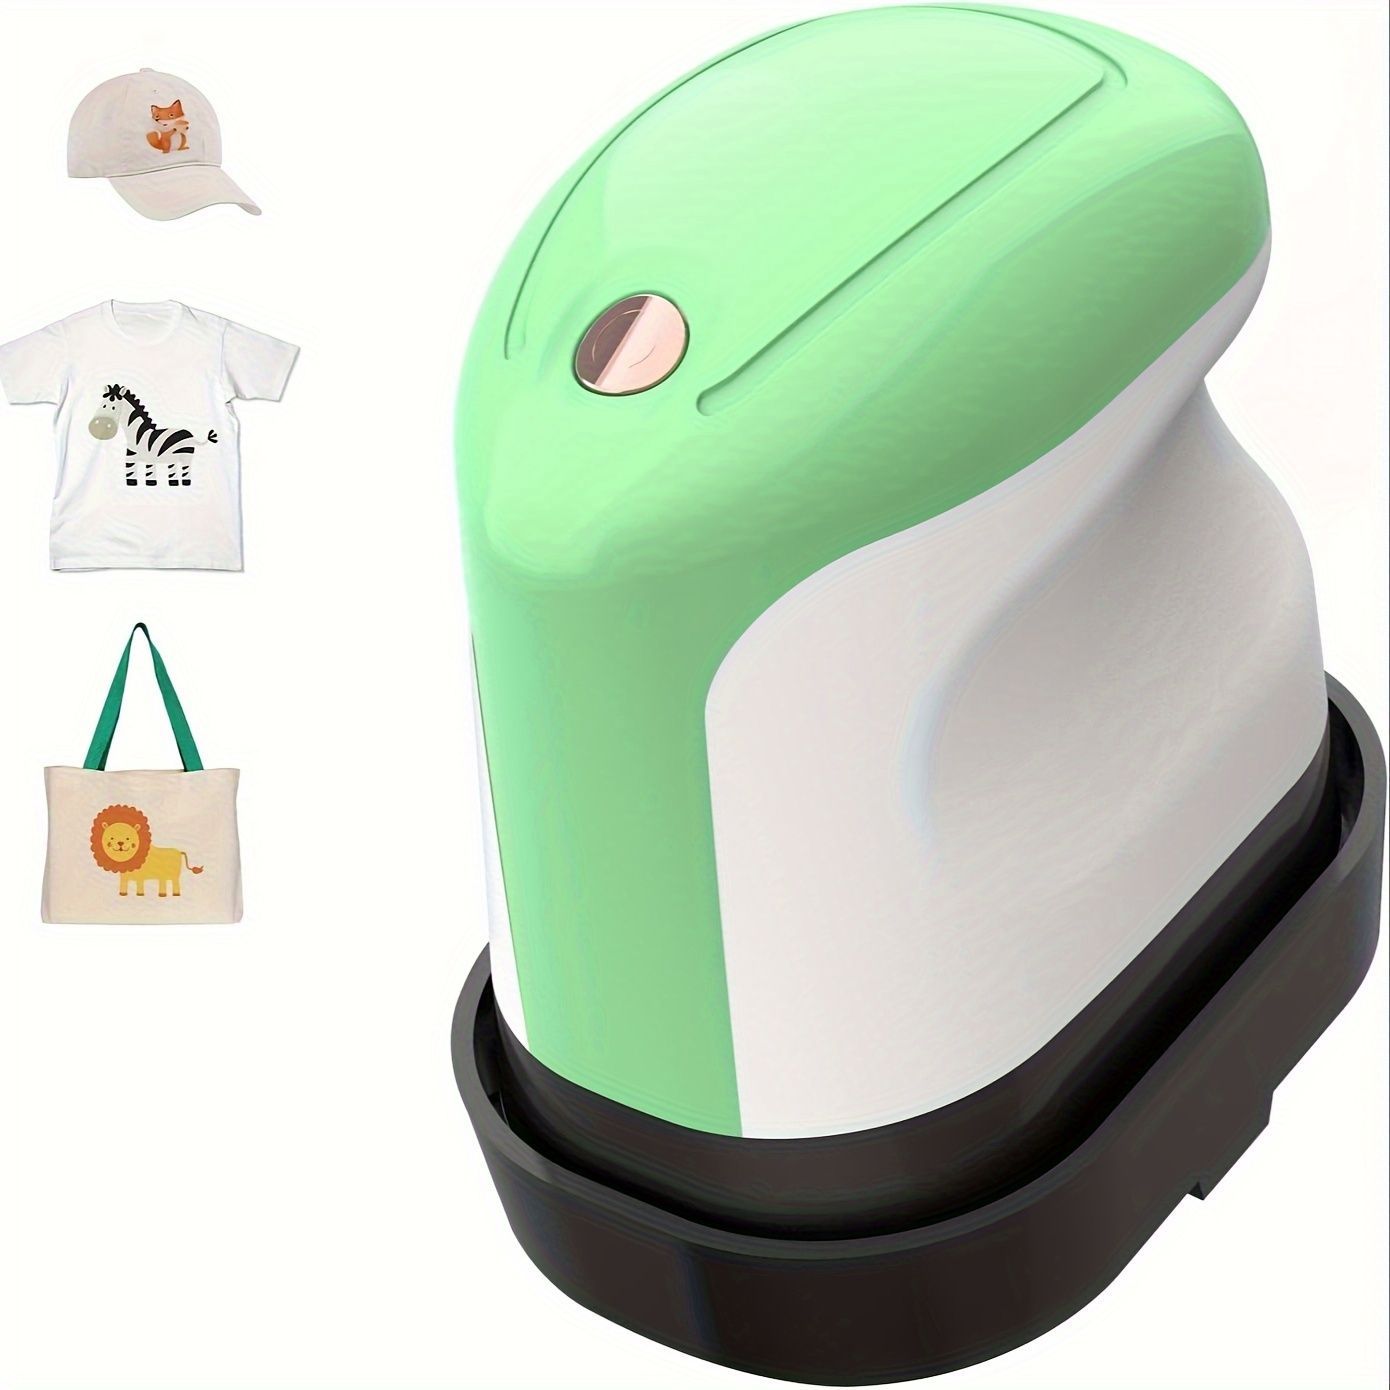 

Mini Heat Press Portable Easy Press Heat Transfer Press Machine With 3 Levels Heating, Ceramic Coated Base Plate, Great For Clothes, T-shirts, Shoes